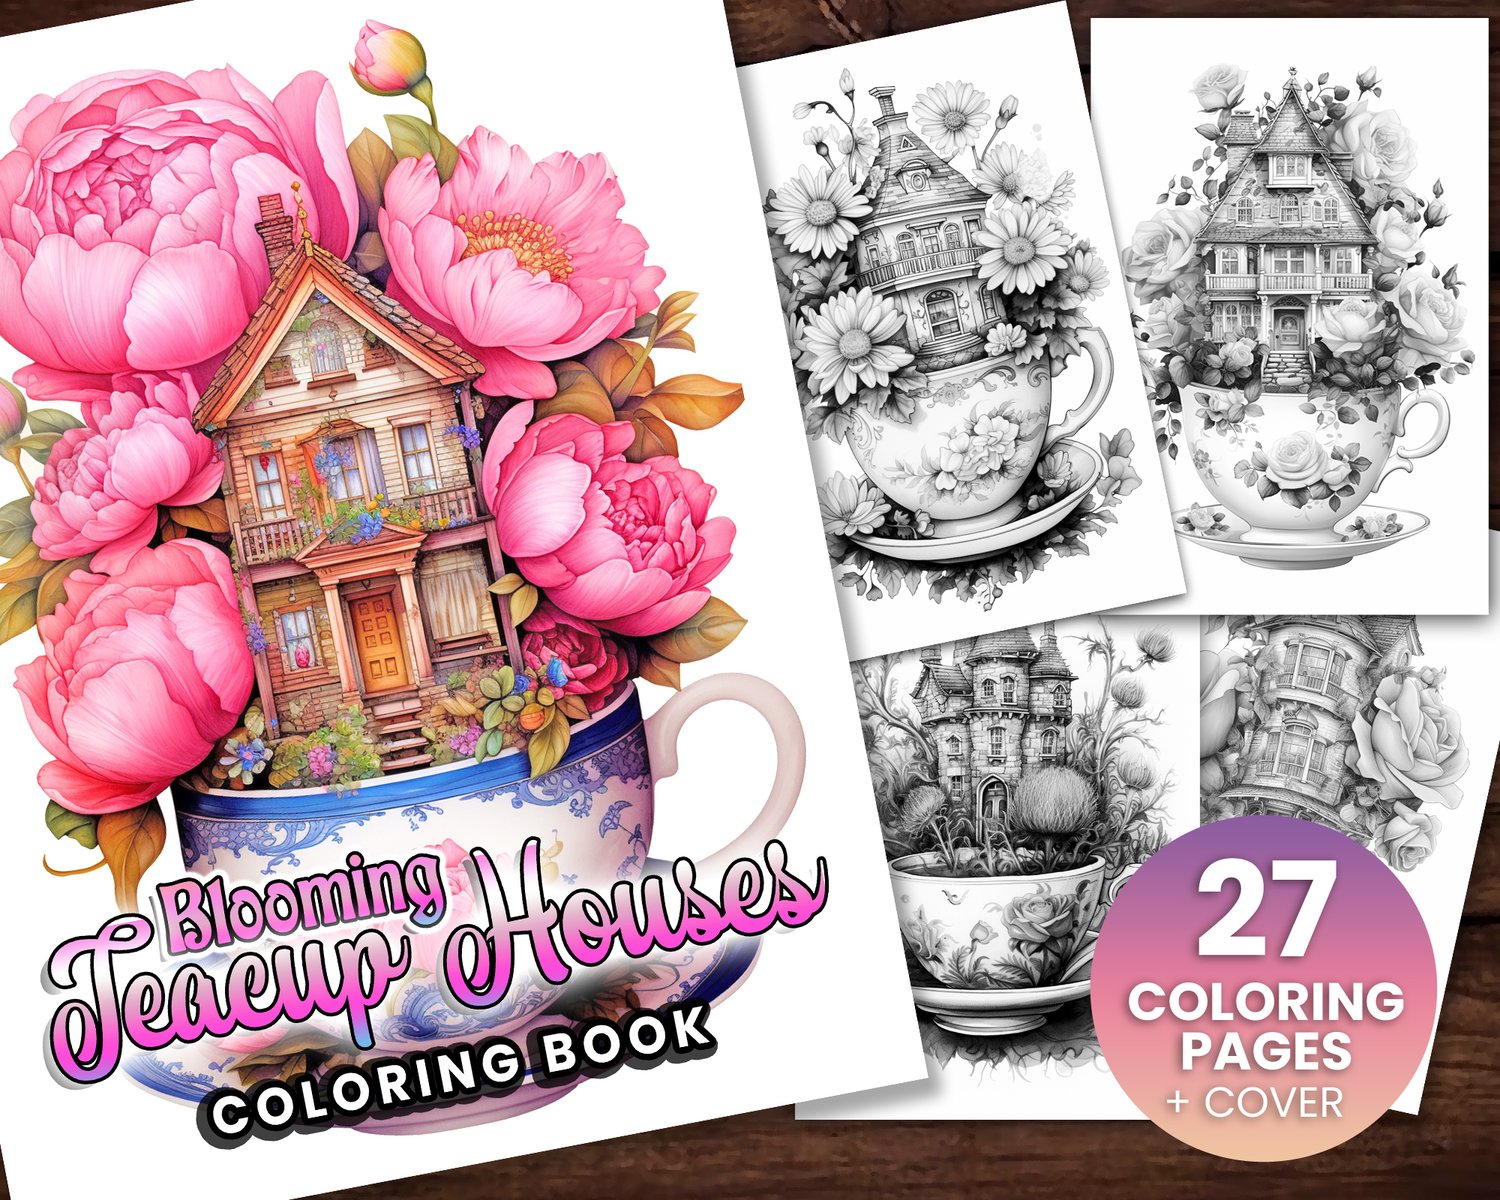 When Flowers Bloom: Adult Coloring Book Sets (Paperback)